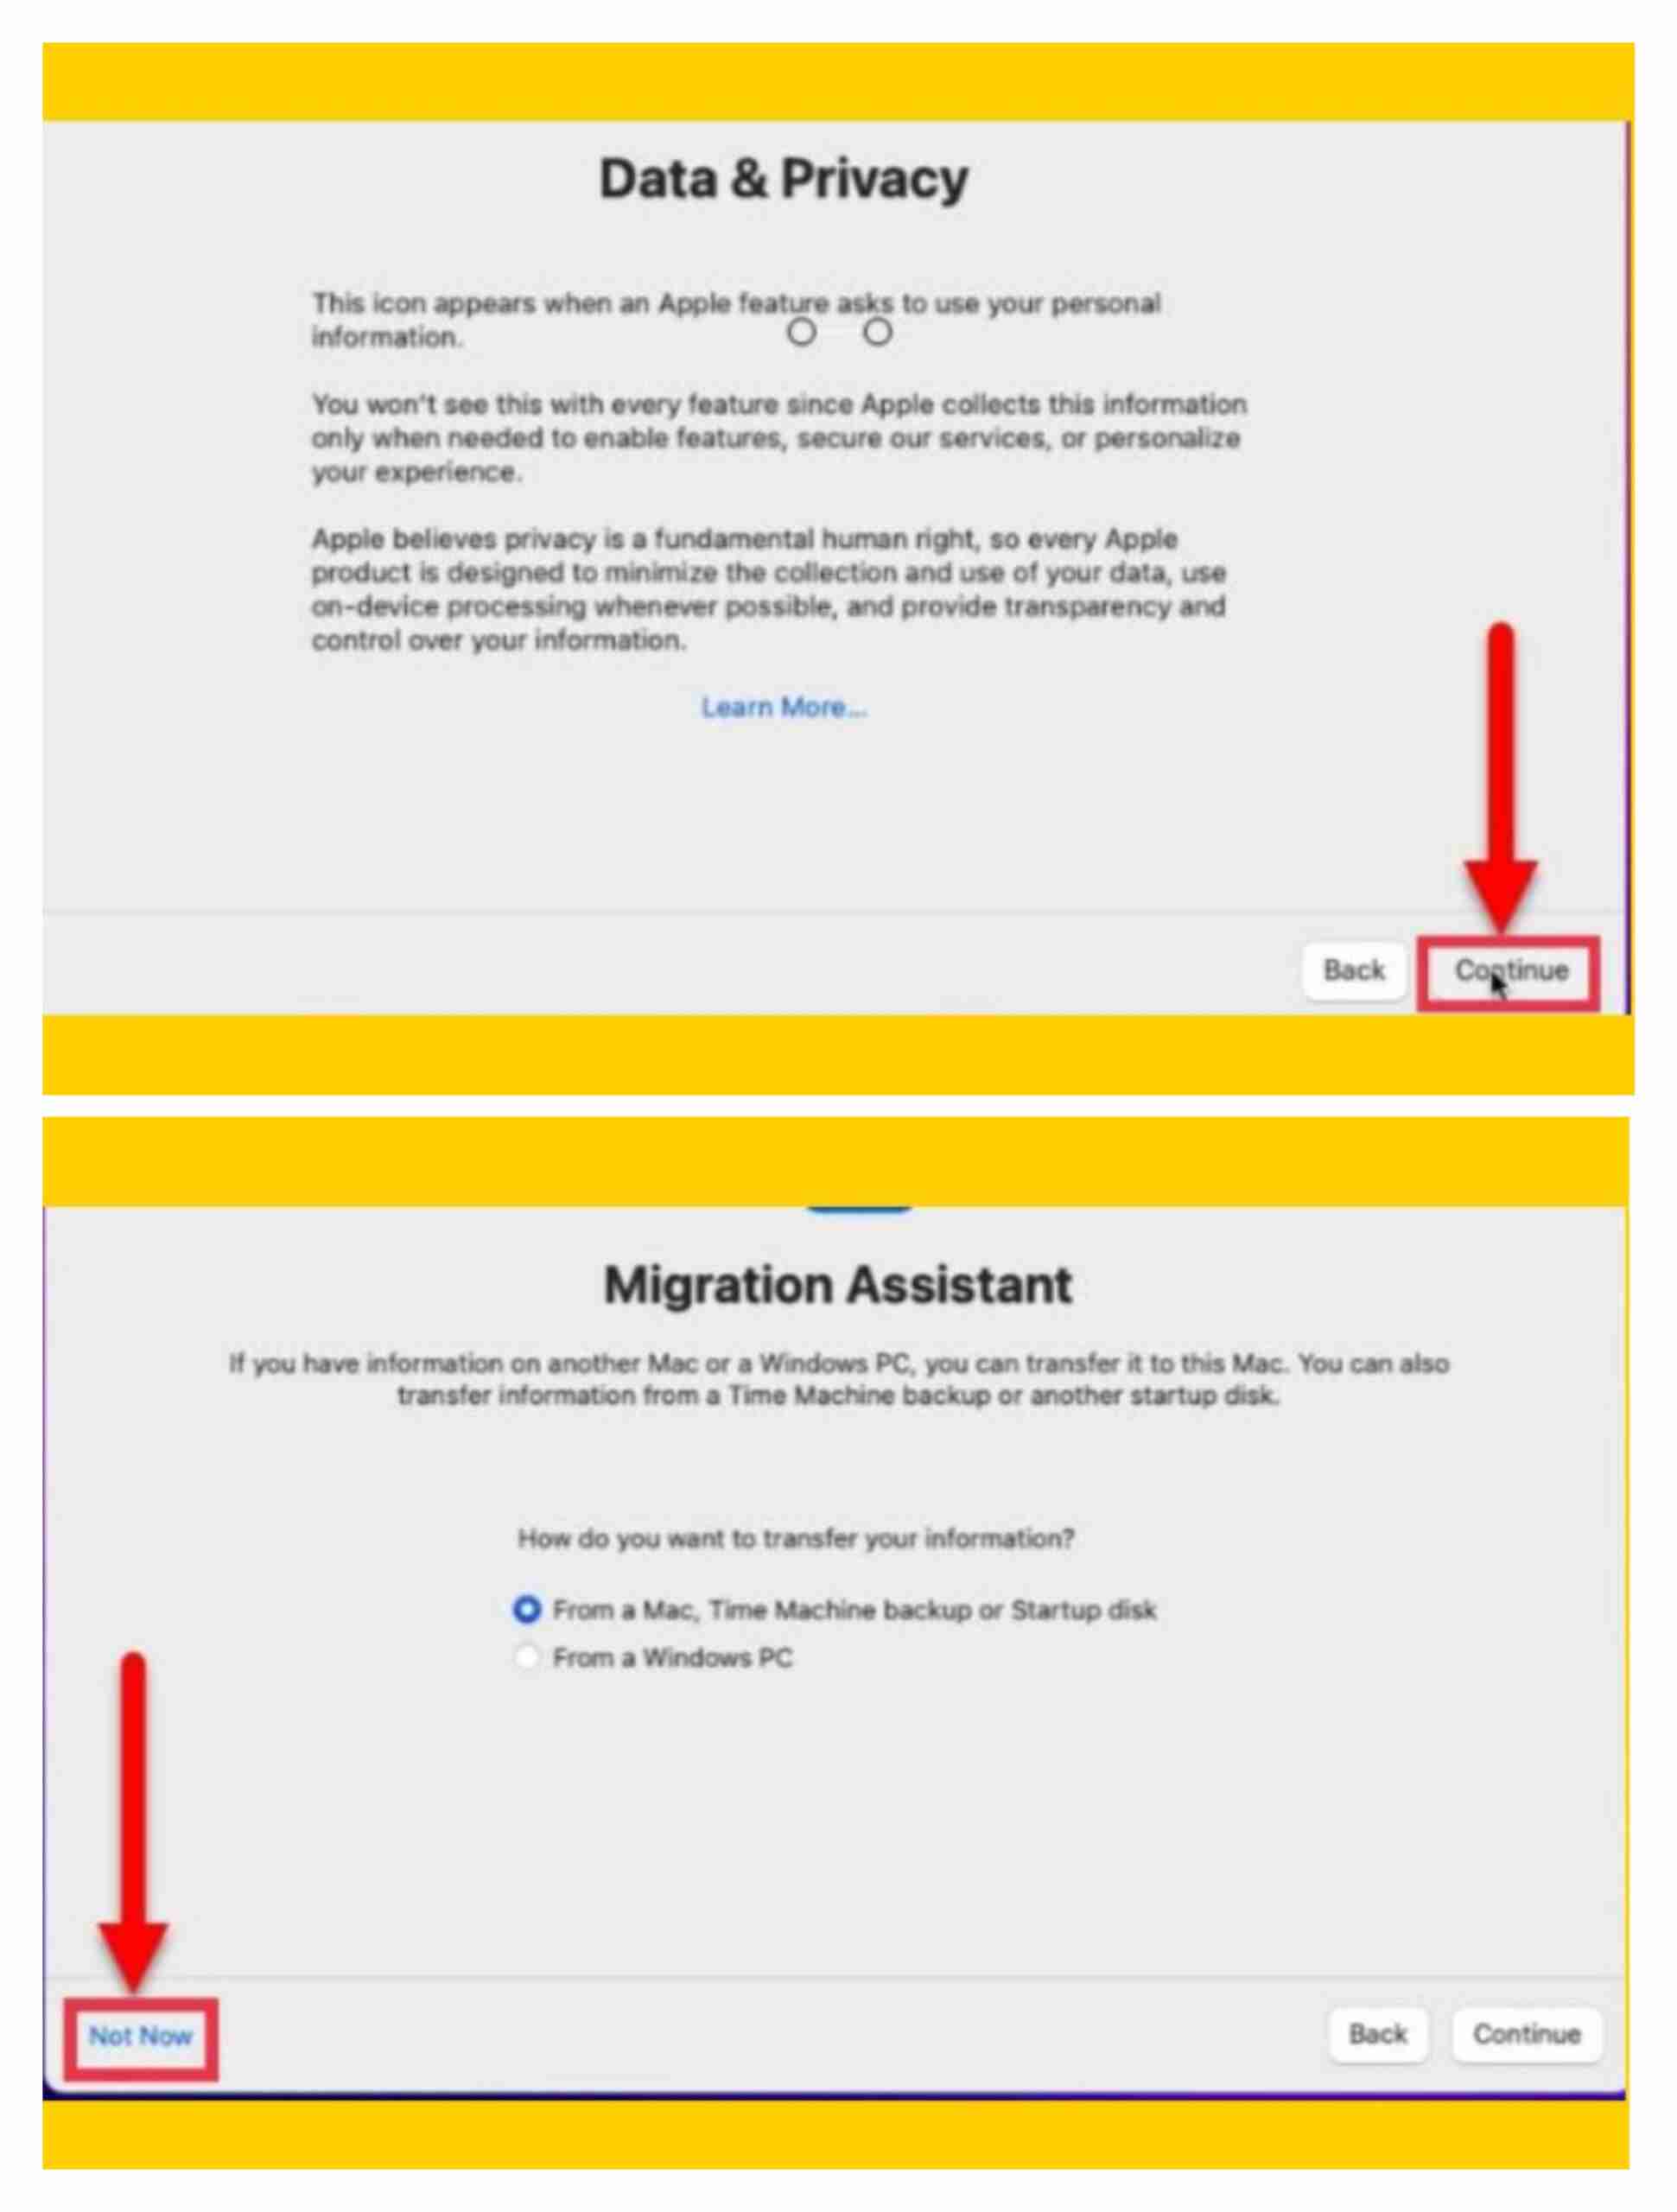 Data & Privacy and Migration Assistant